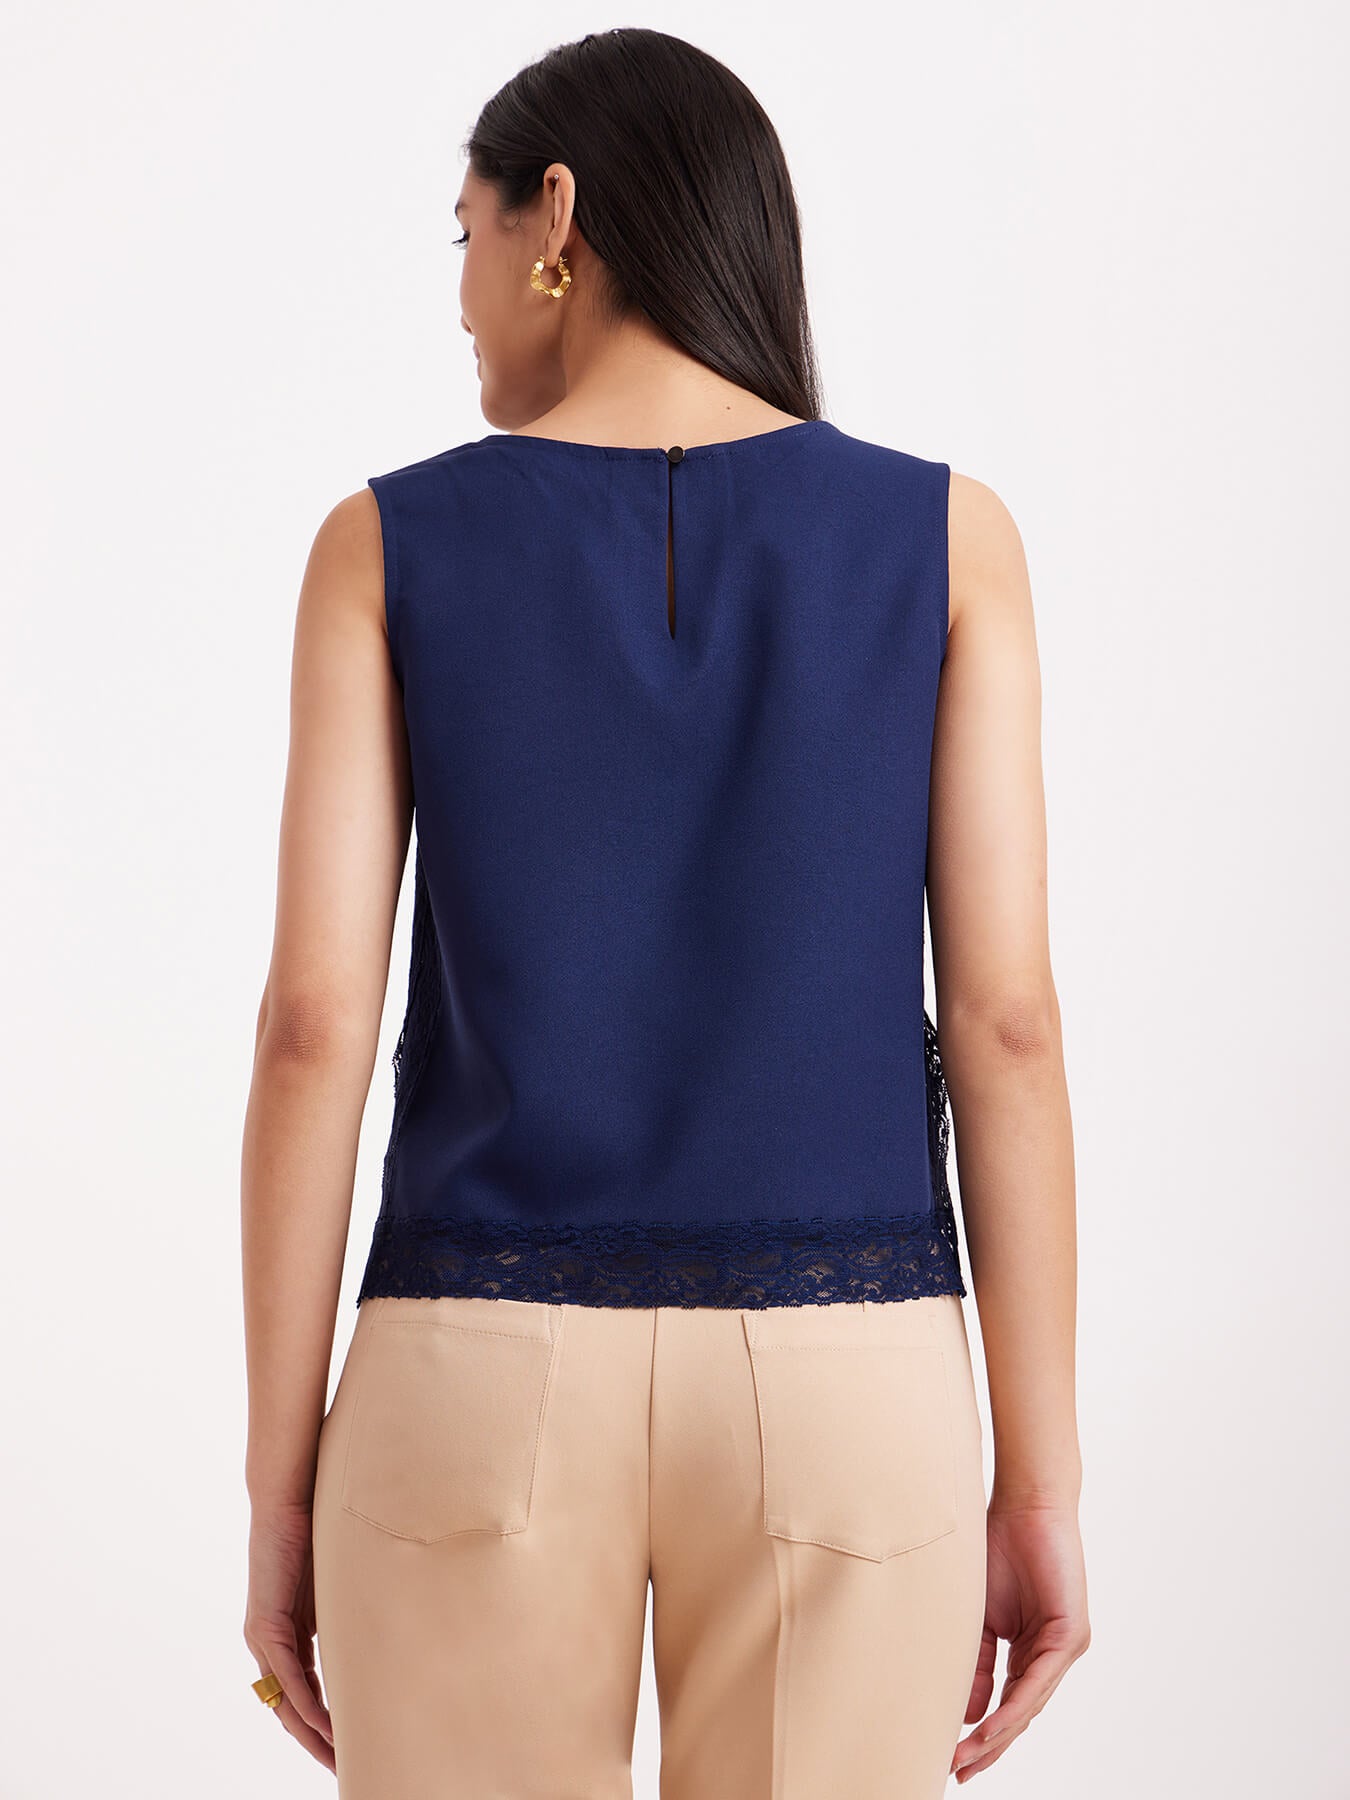 Round Neck Lace Top - Navy Blue